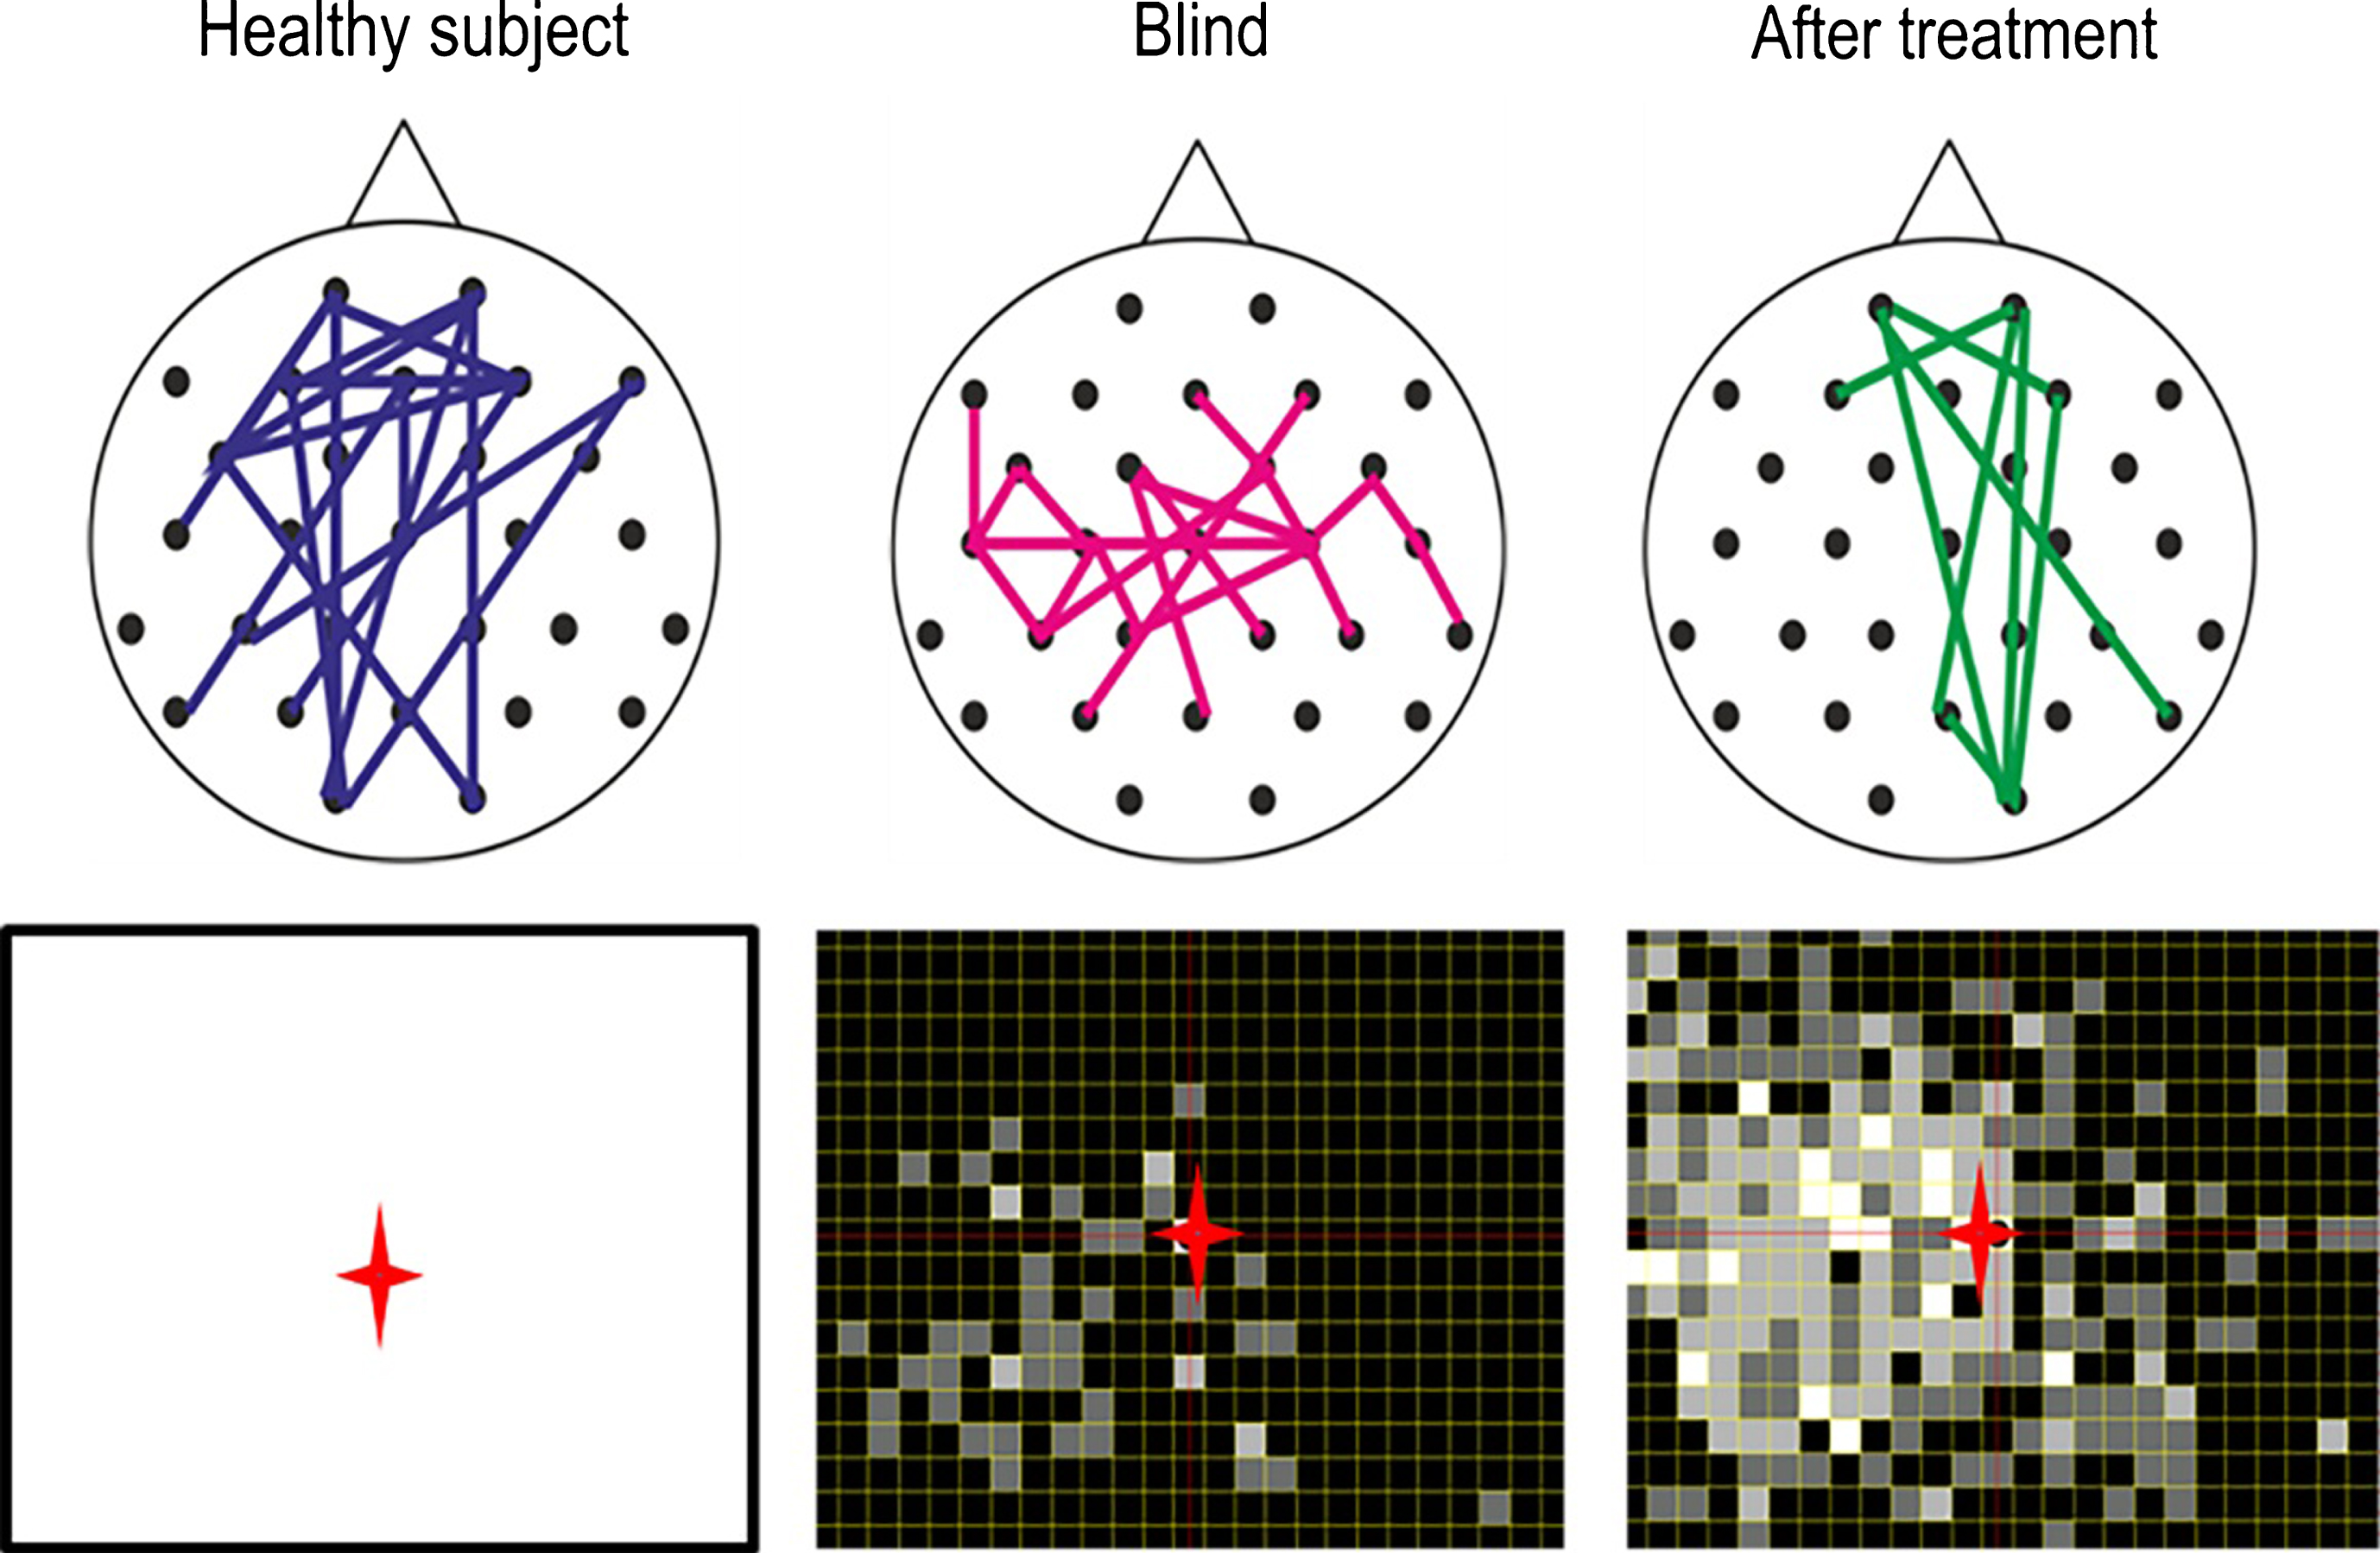 Brain functional network reorganization. Healthy subjects have a strong functional connectivity network between occipital and frontal regions of the brain. But in patients with visual field defects this network is lost. When treated for 10 days with alternating current stimulation, this network is partially restored (Bola et al., 2014). Lower panel: As the brain functional connectivity recovers, so does the visual field (shown here with supra-threshold campimetry) (Sabel, 2016).